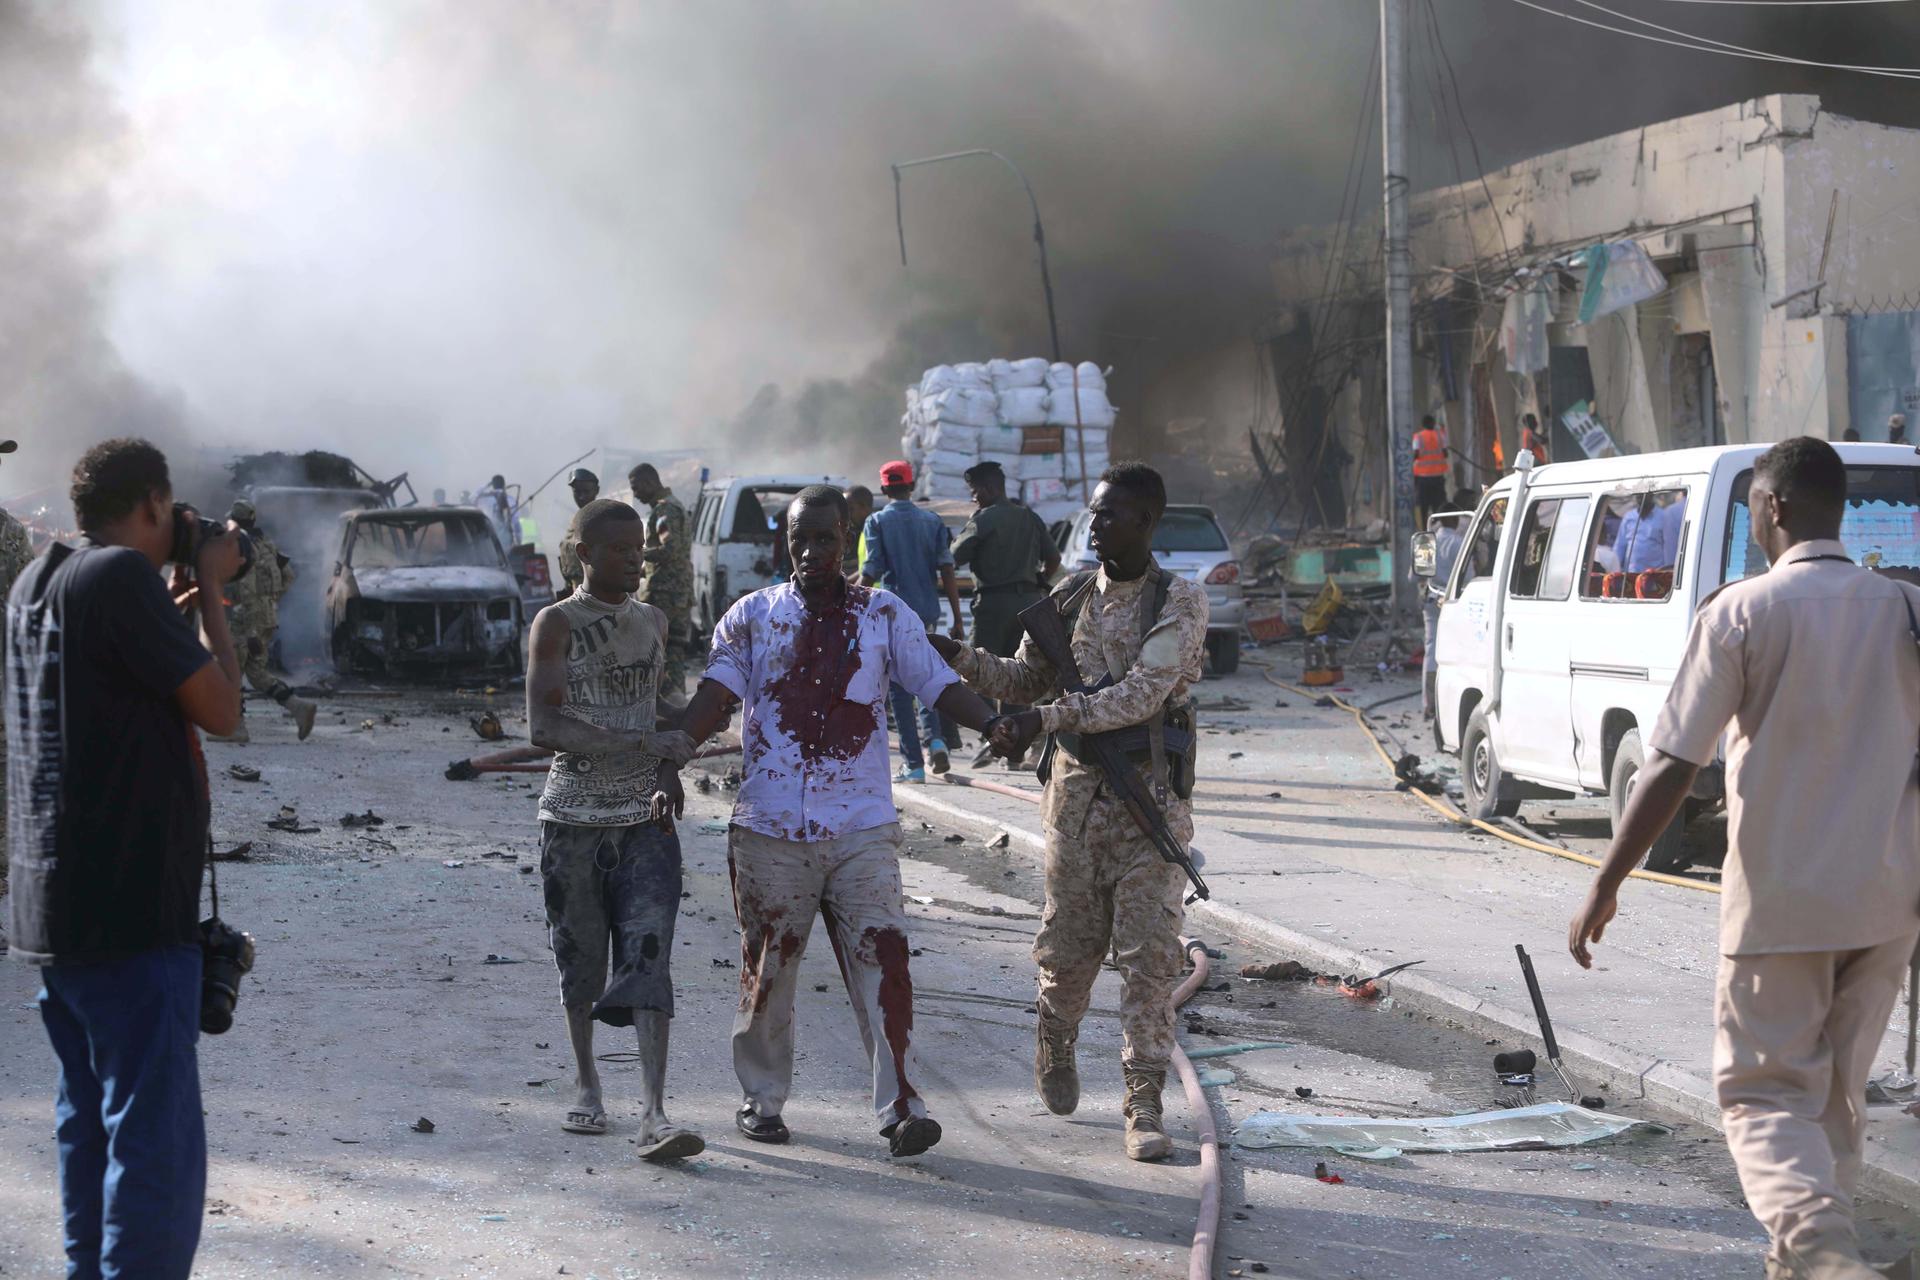 A Somali government soldier evacuates an injured man from the scene of an explosion.